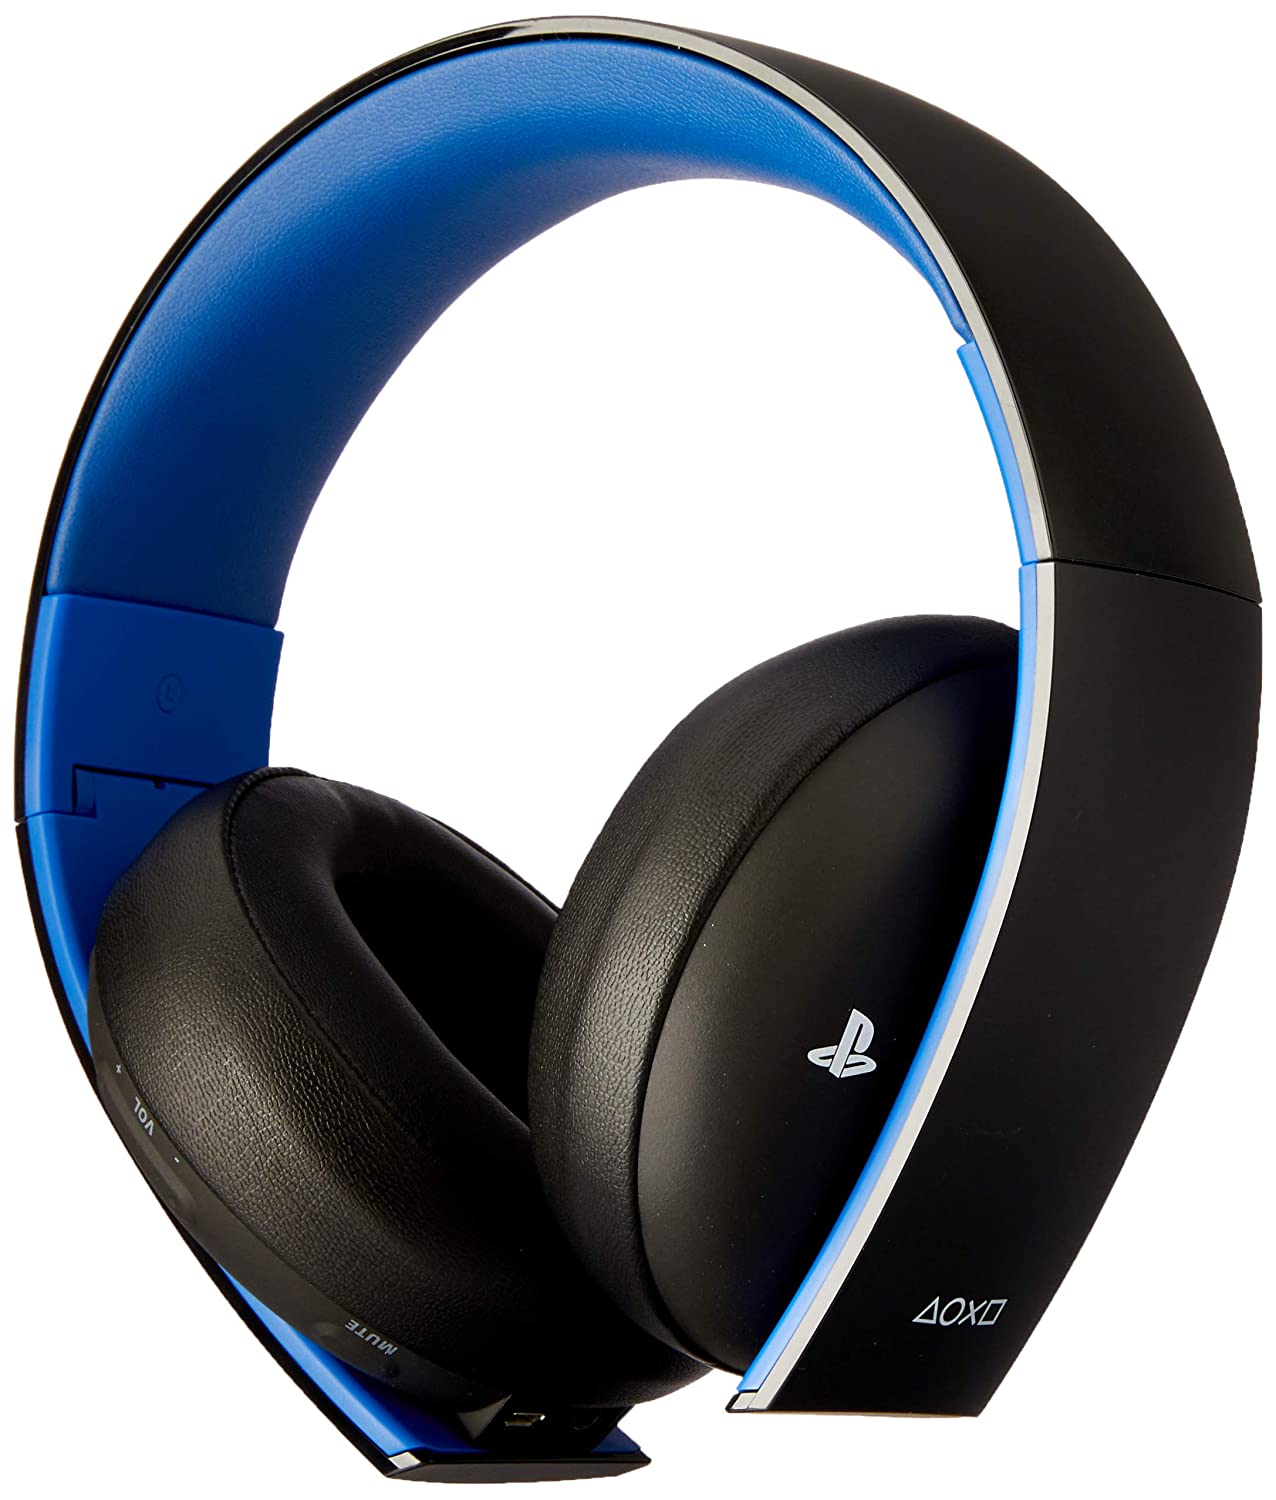 Official Sony Playstation Wireless Stereo Headset 2.0